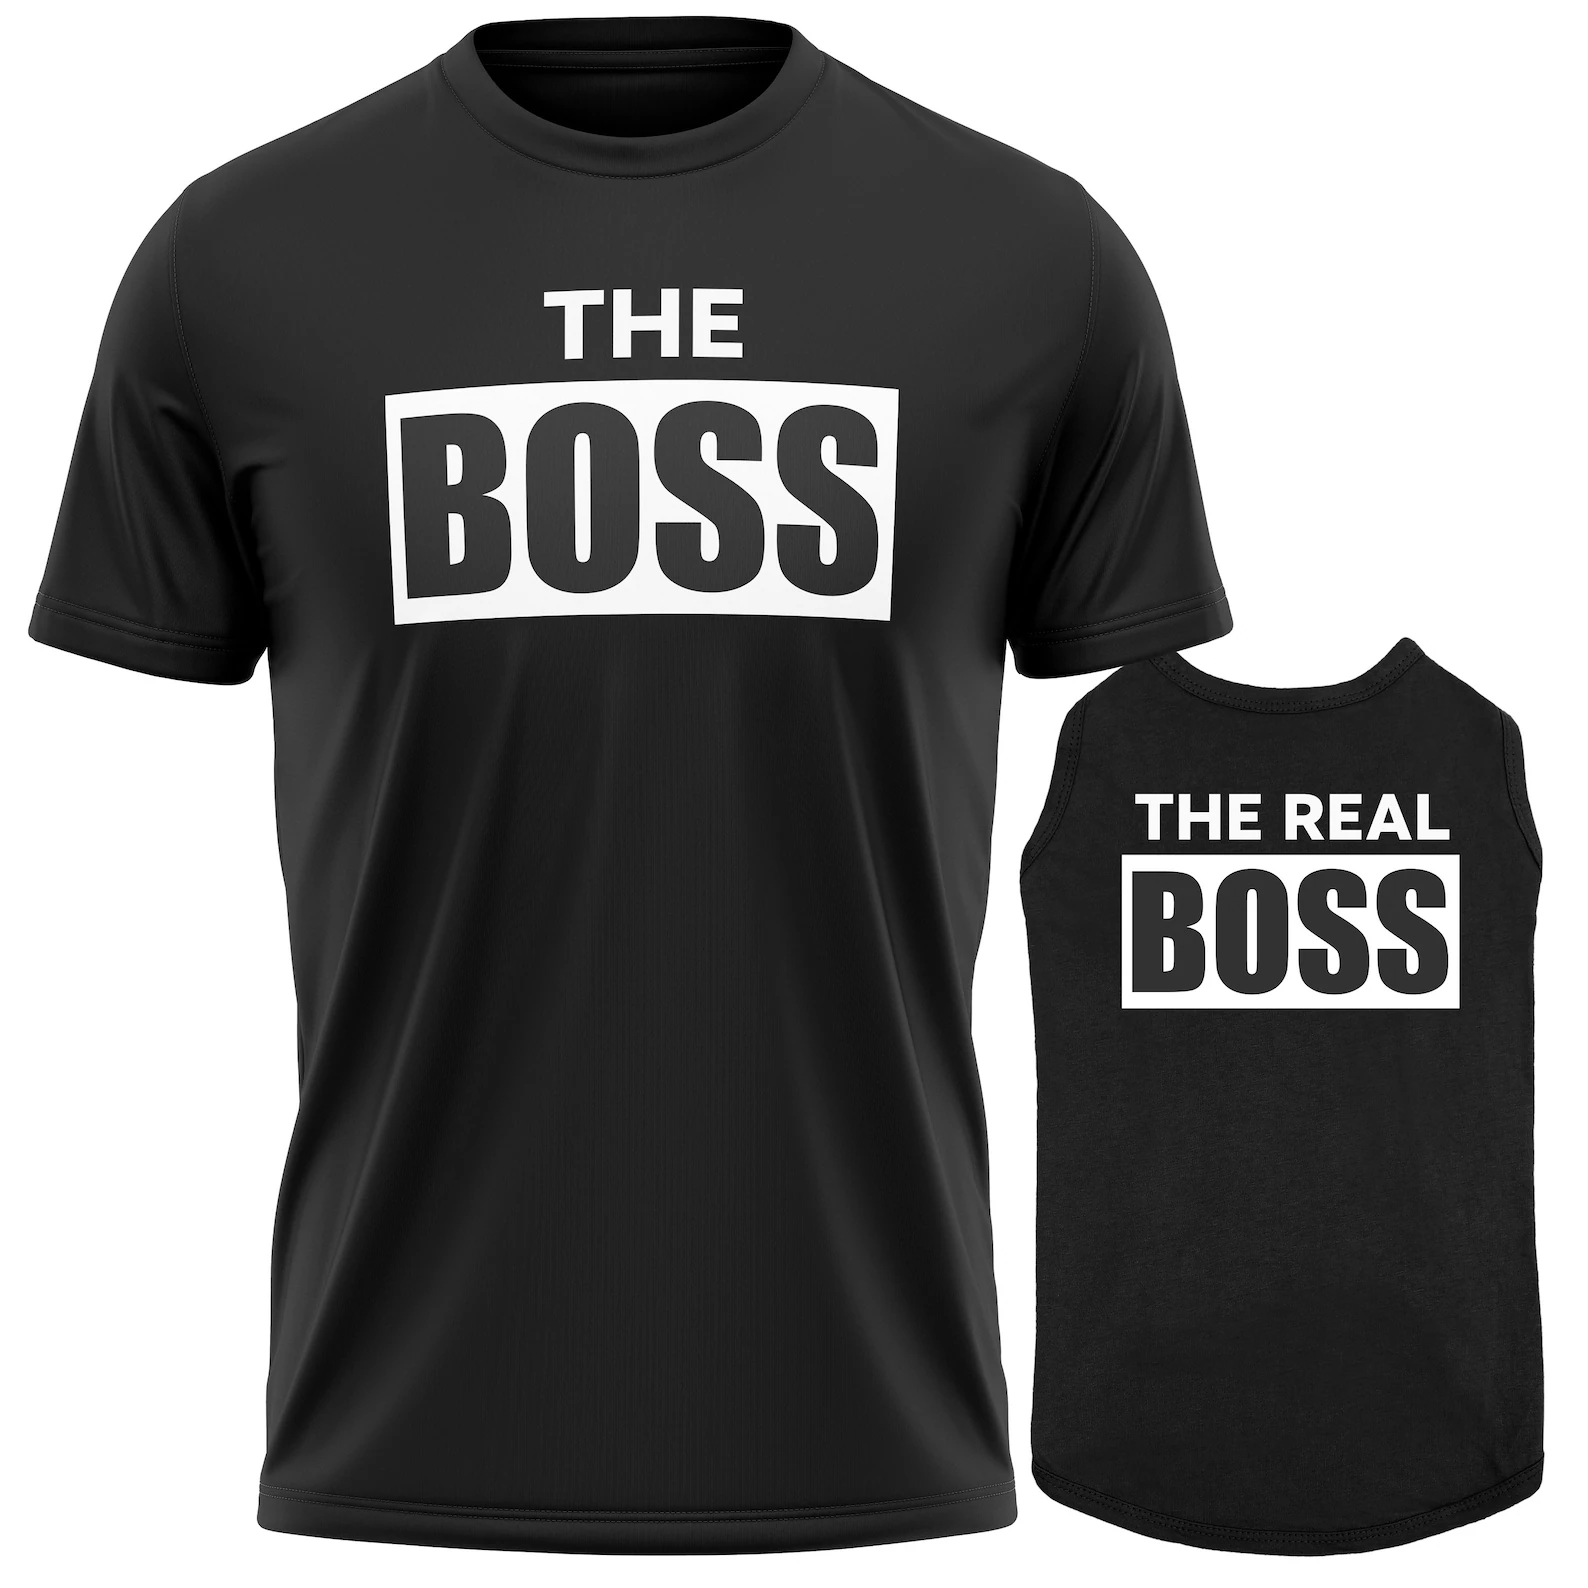 The shirt says "The Boss" while the matching outfit for the dog says "The Real Boss"